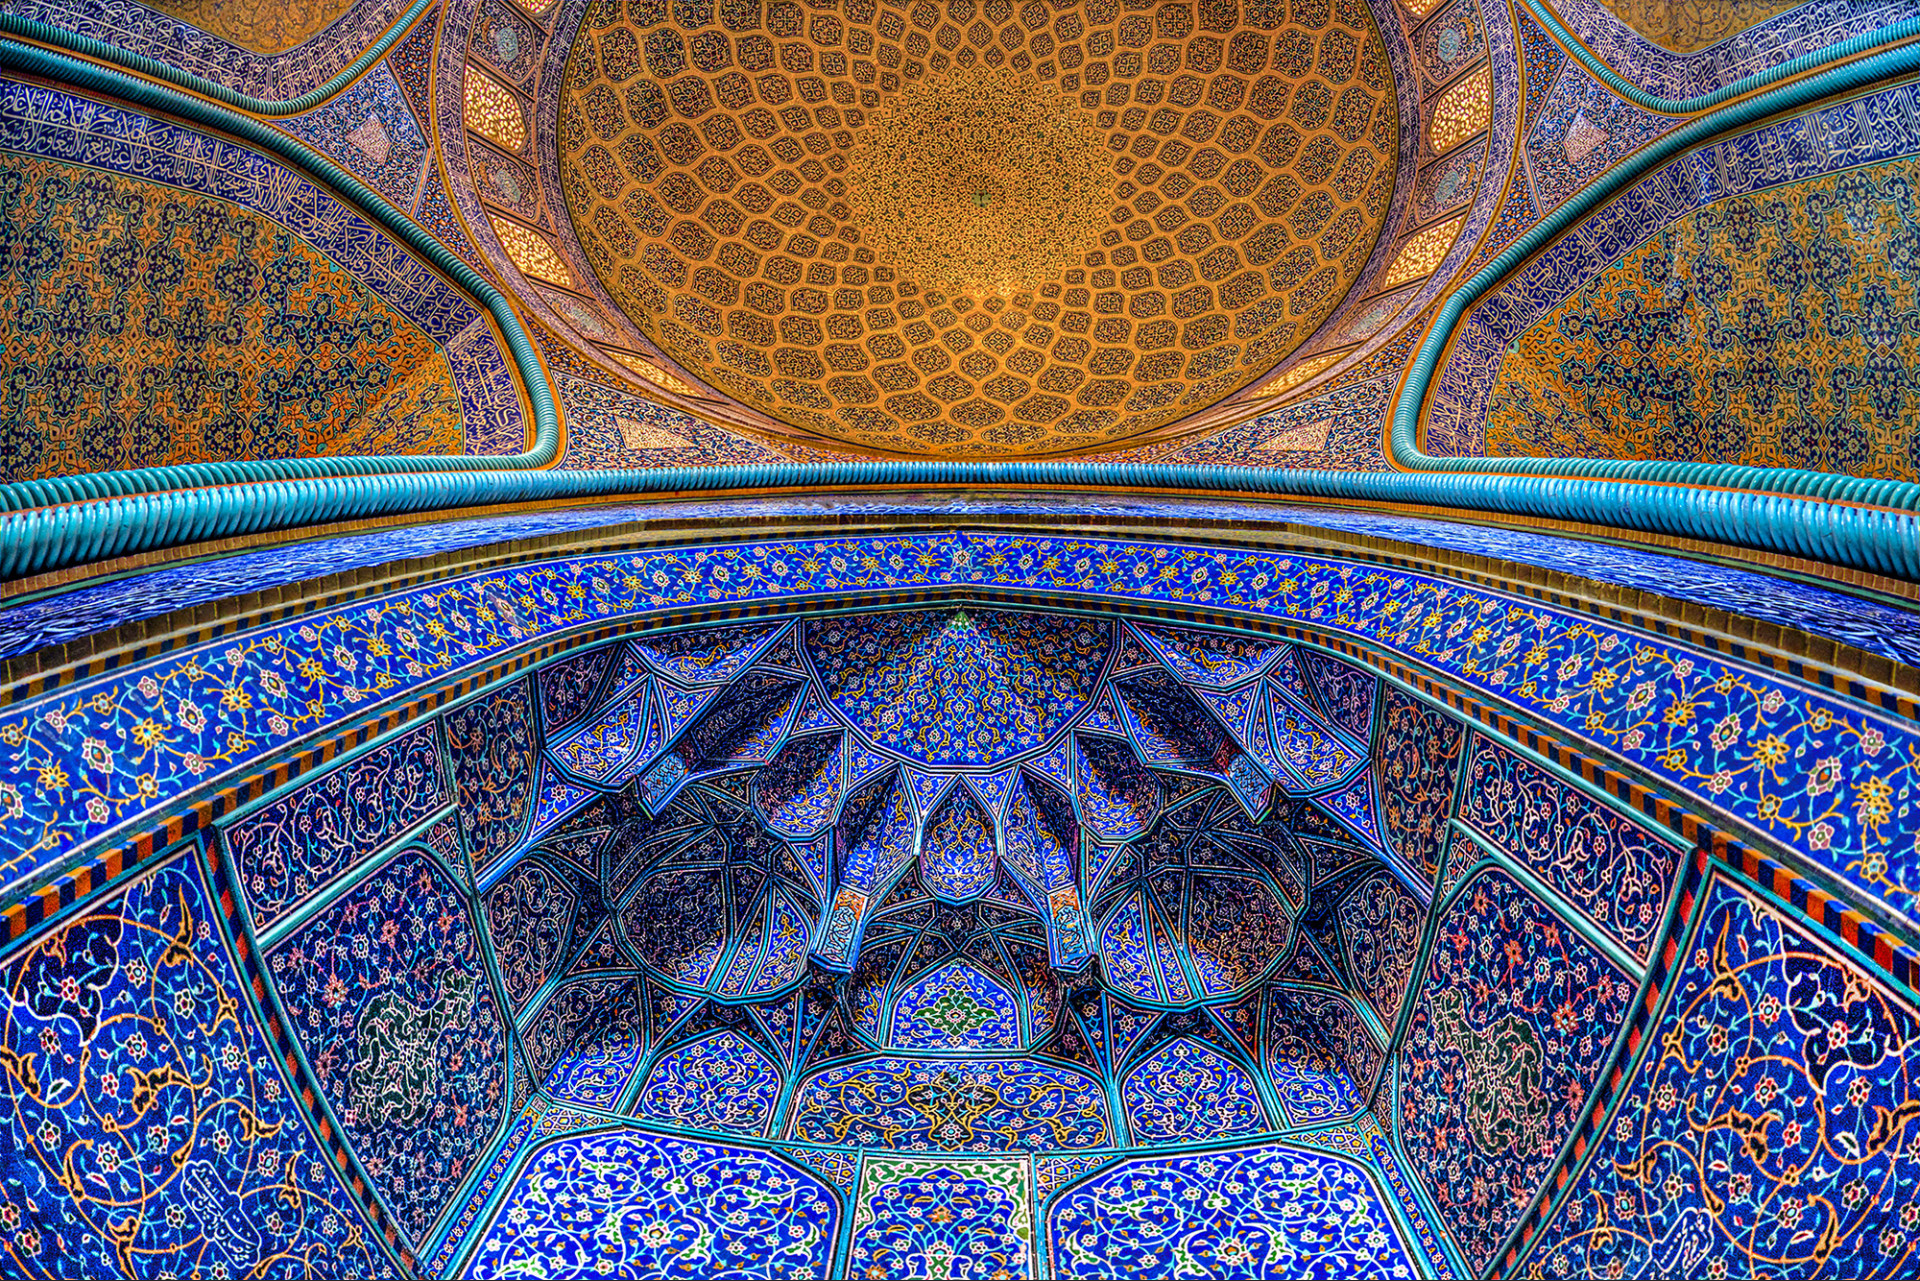 General 1920x1281 Iran Isfahan Sheikh Lotfollah Mosque architecture bottom view pattern mosque colorful mosaic ornamented arch ceiling